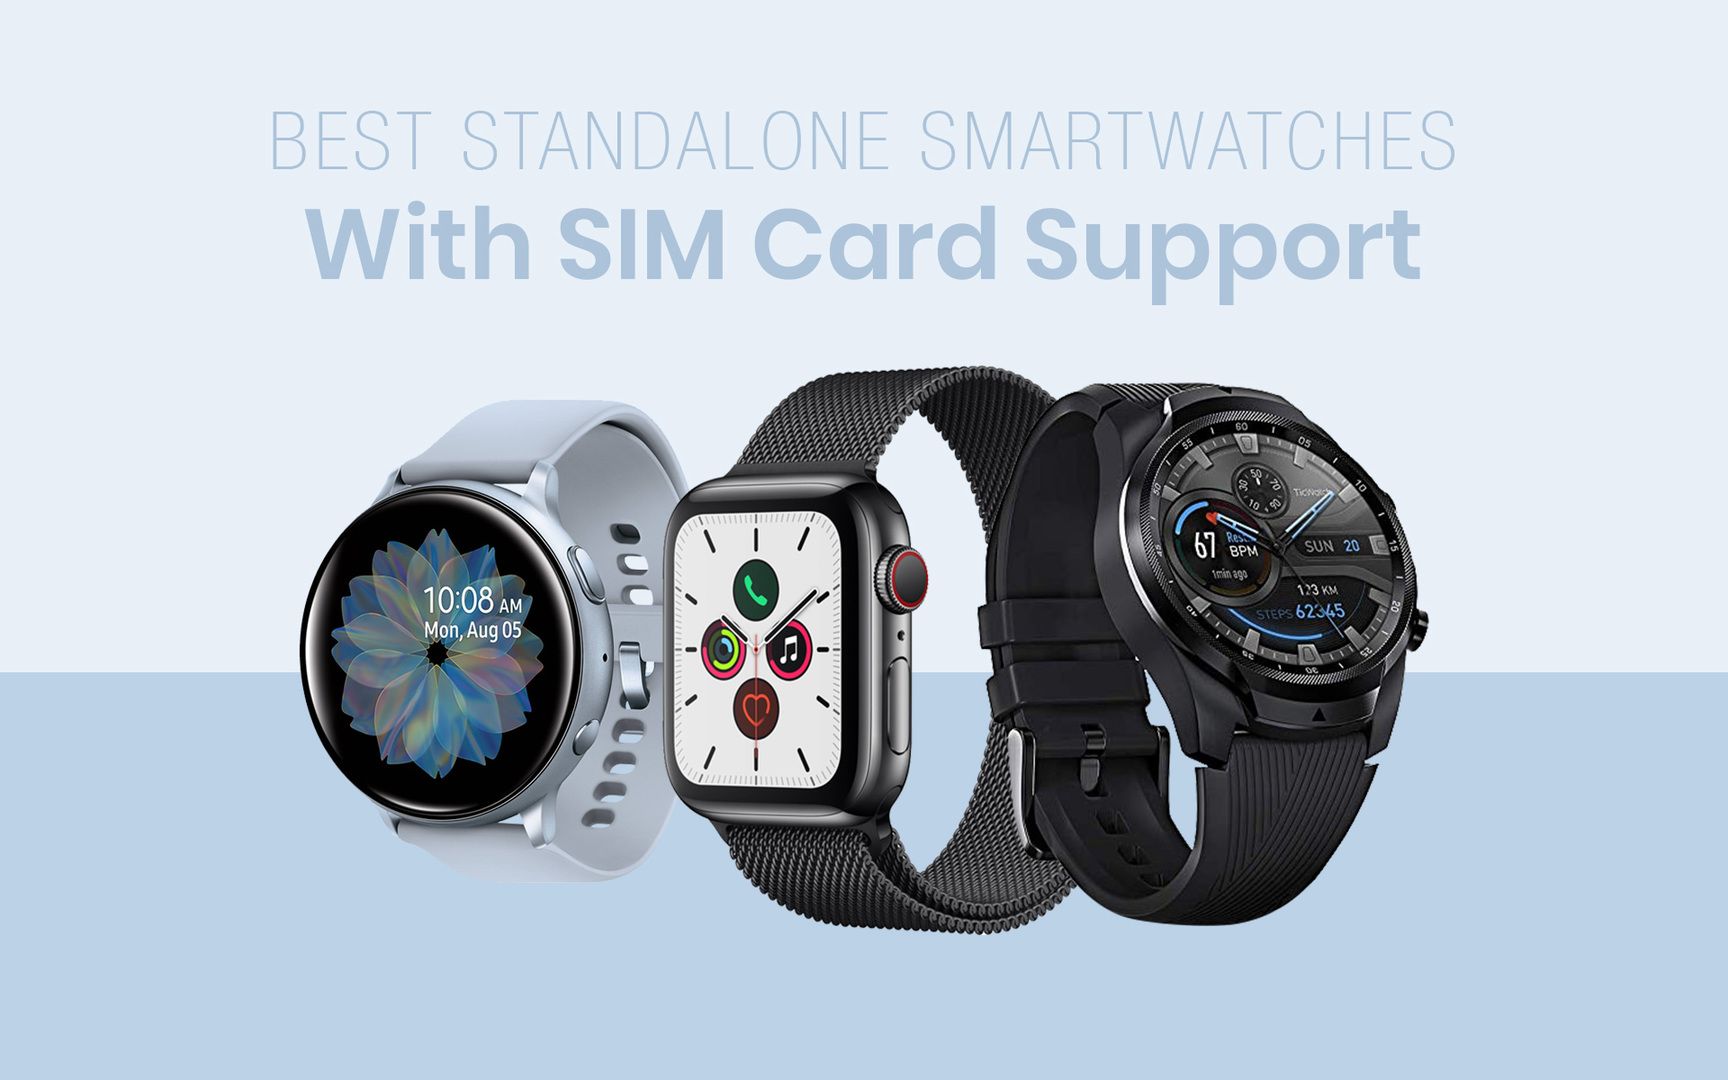 Best Standalone Smartwatches With SIM Card Support